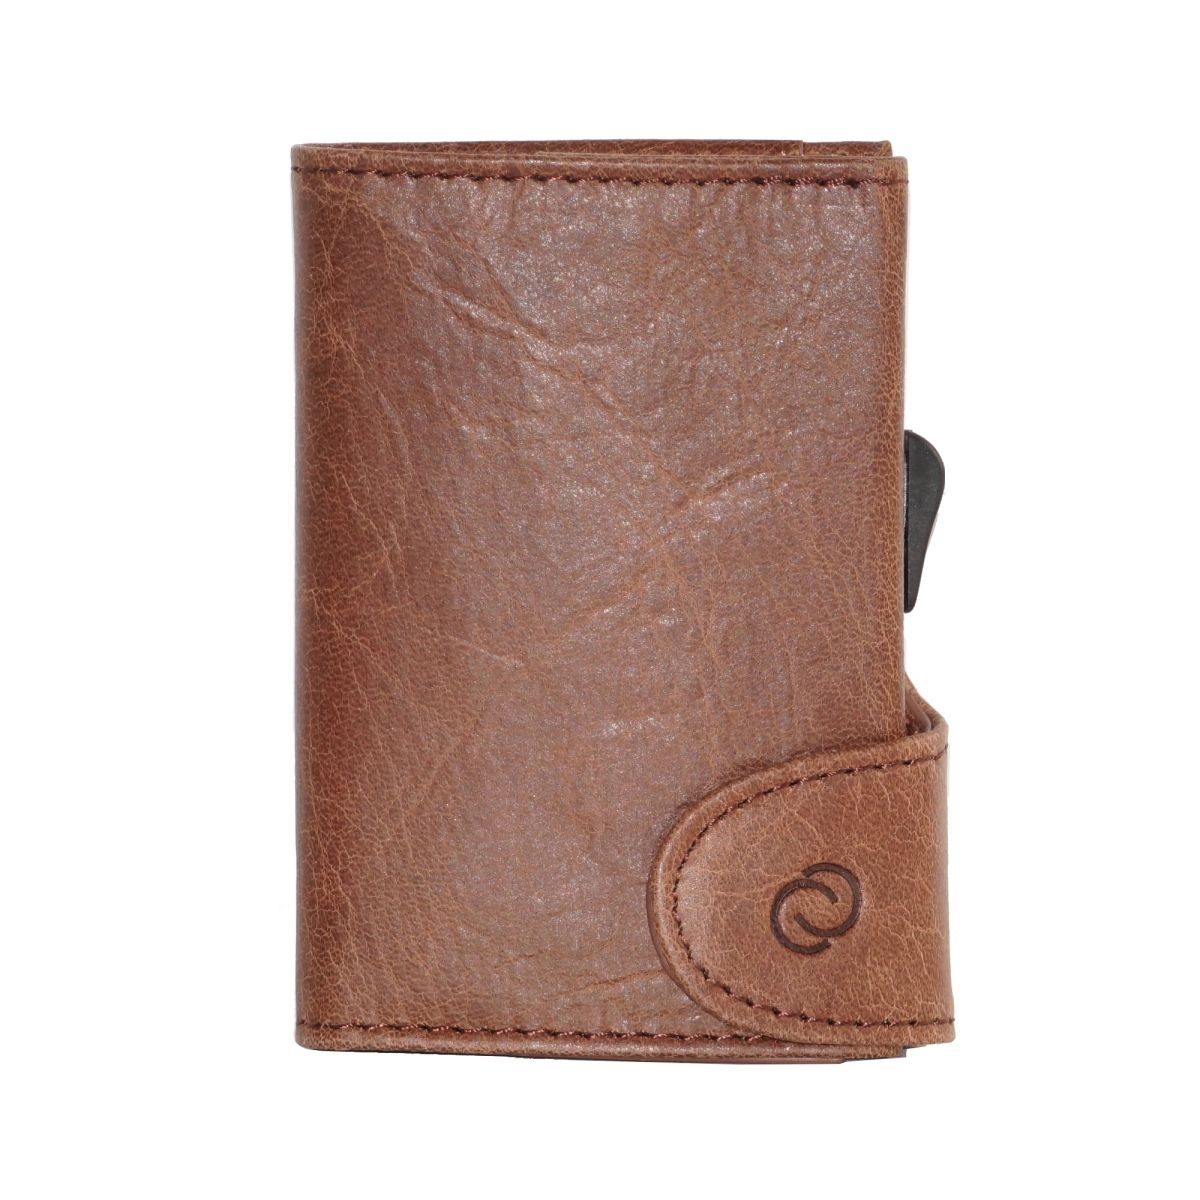 C-Secure Aluminum Card Holder with Genuine Leather and Coin Pouch - Dark Brown